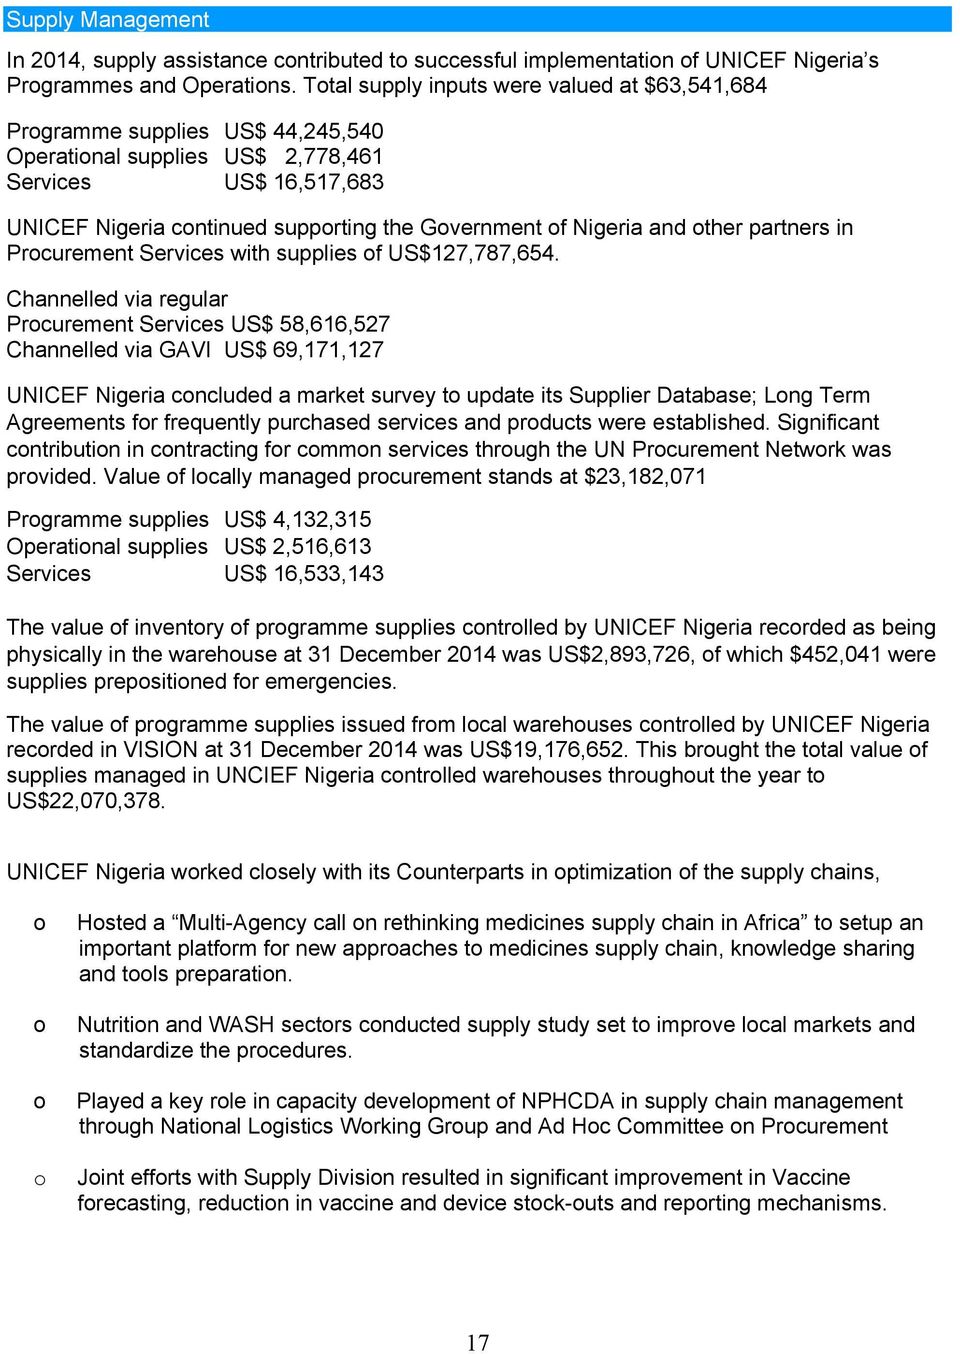 Nigeria and other partners in Procurement Services with supplies of US$127,787,654.